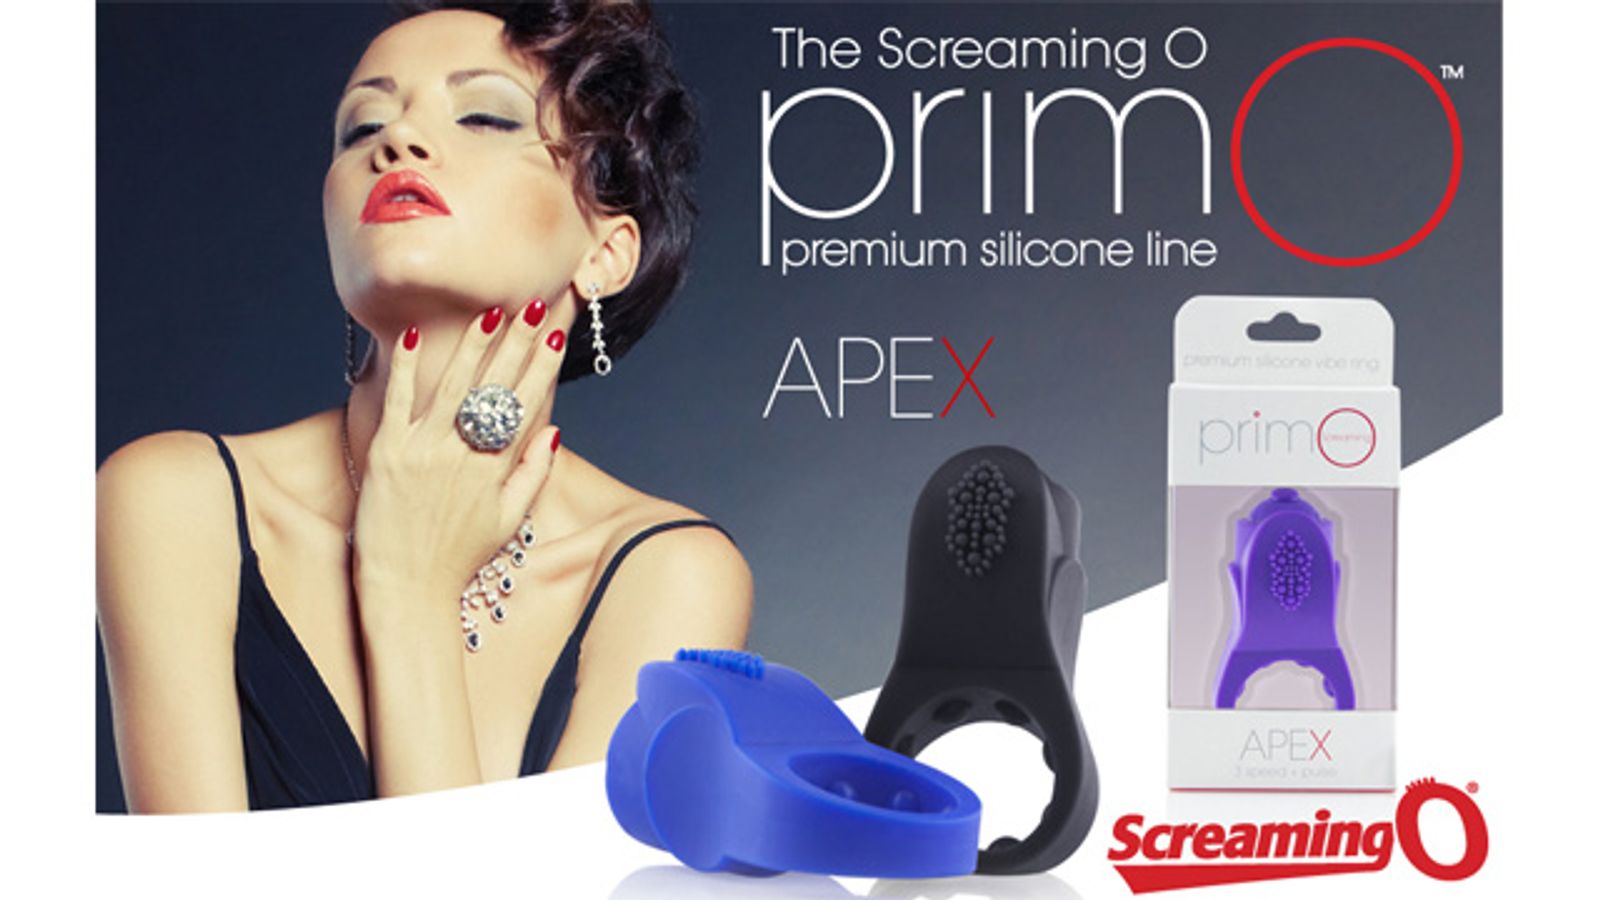 The Screaming O Brings Couples Pleasure With PrimO Apex